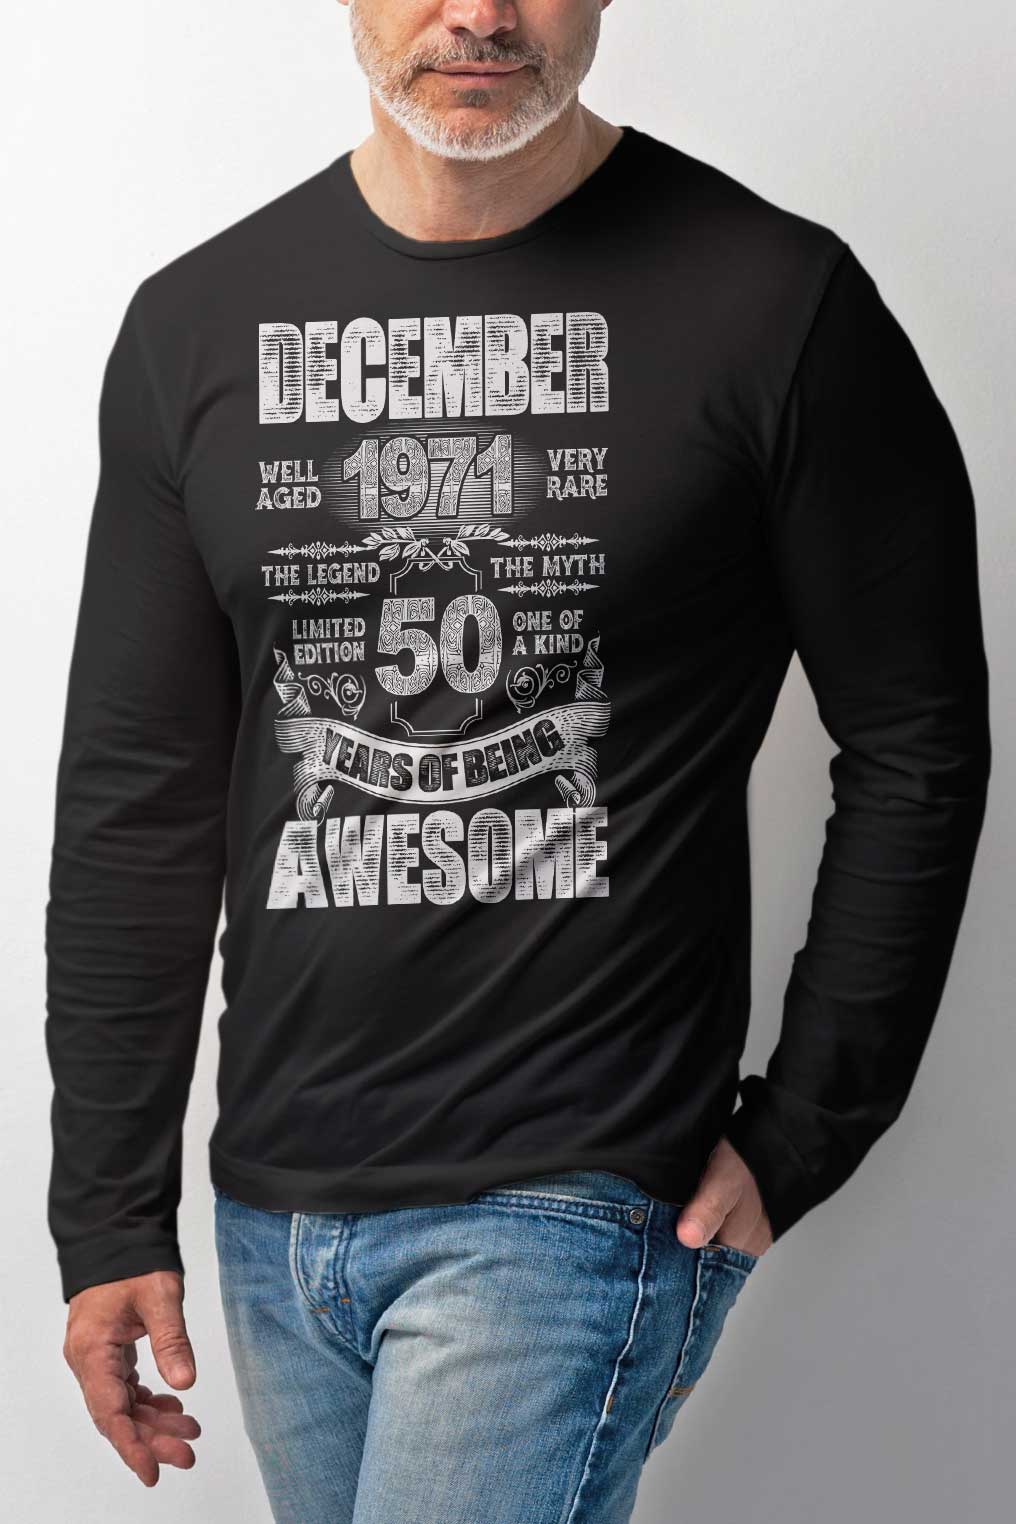 The myth - for a birthday with a month and a year to order - a T-shirt, blouse or sweatshirt-liratech.eu